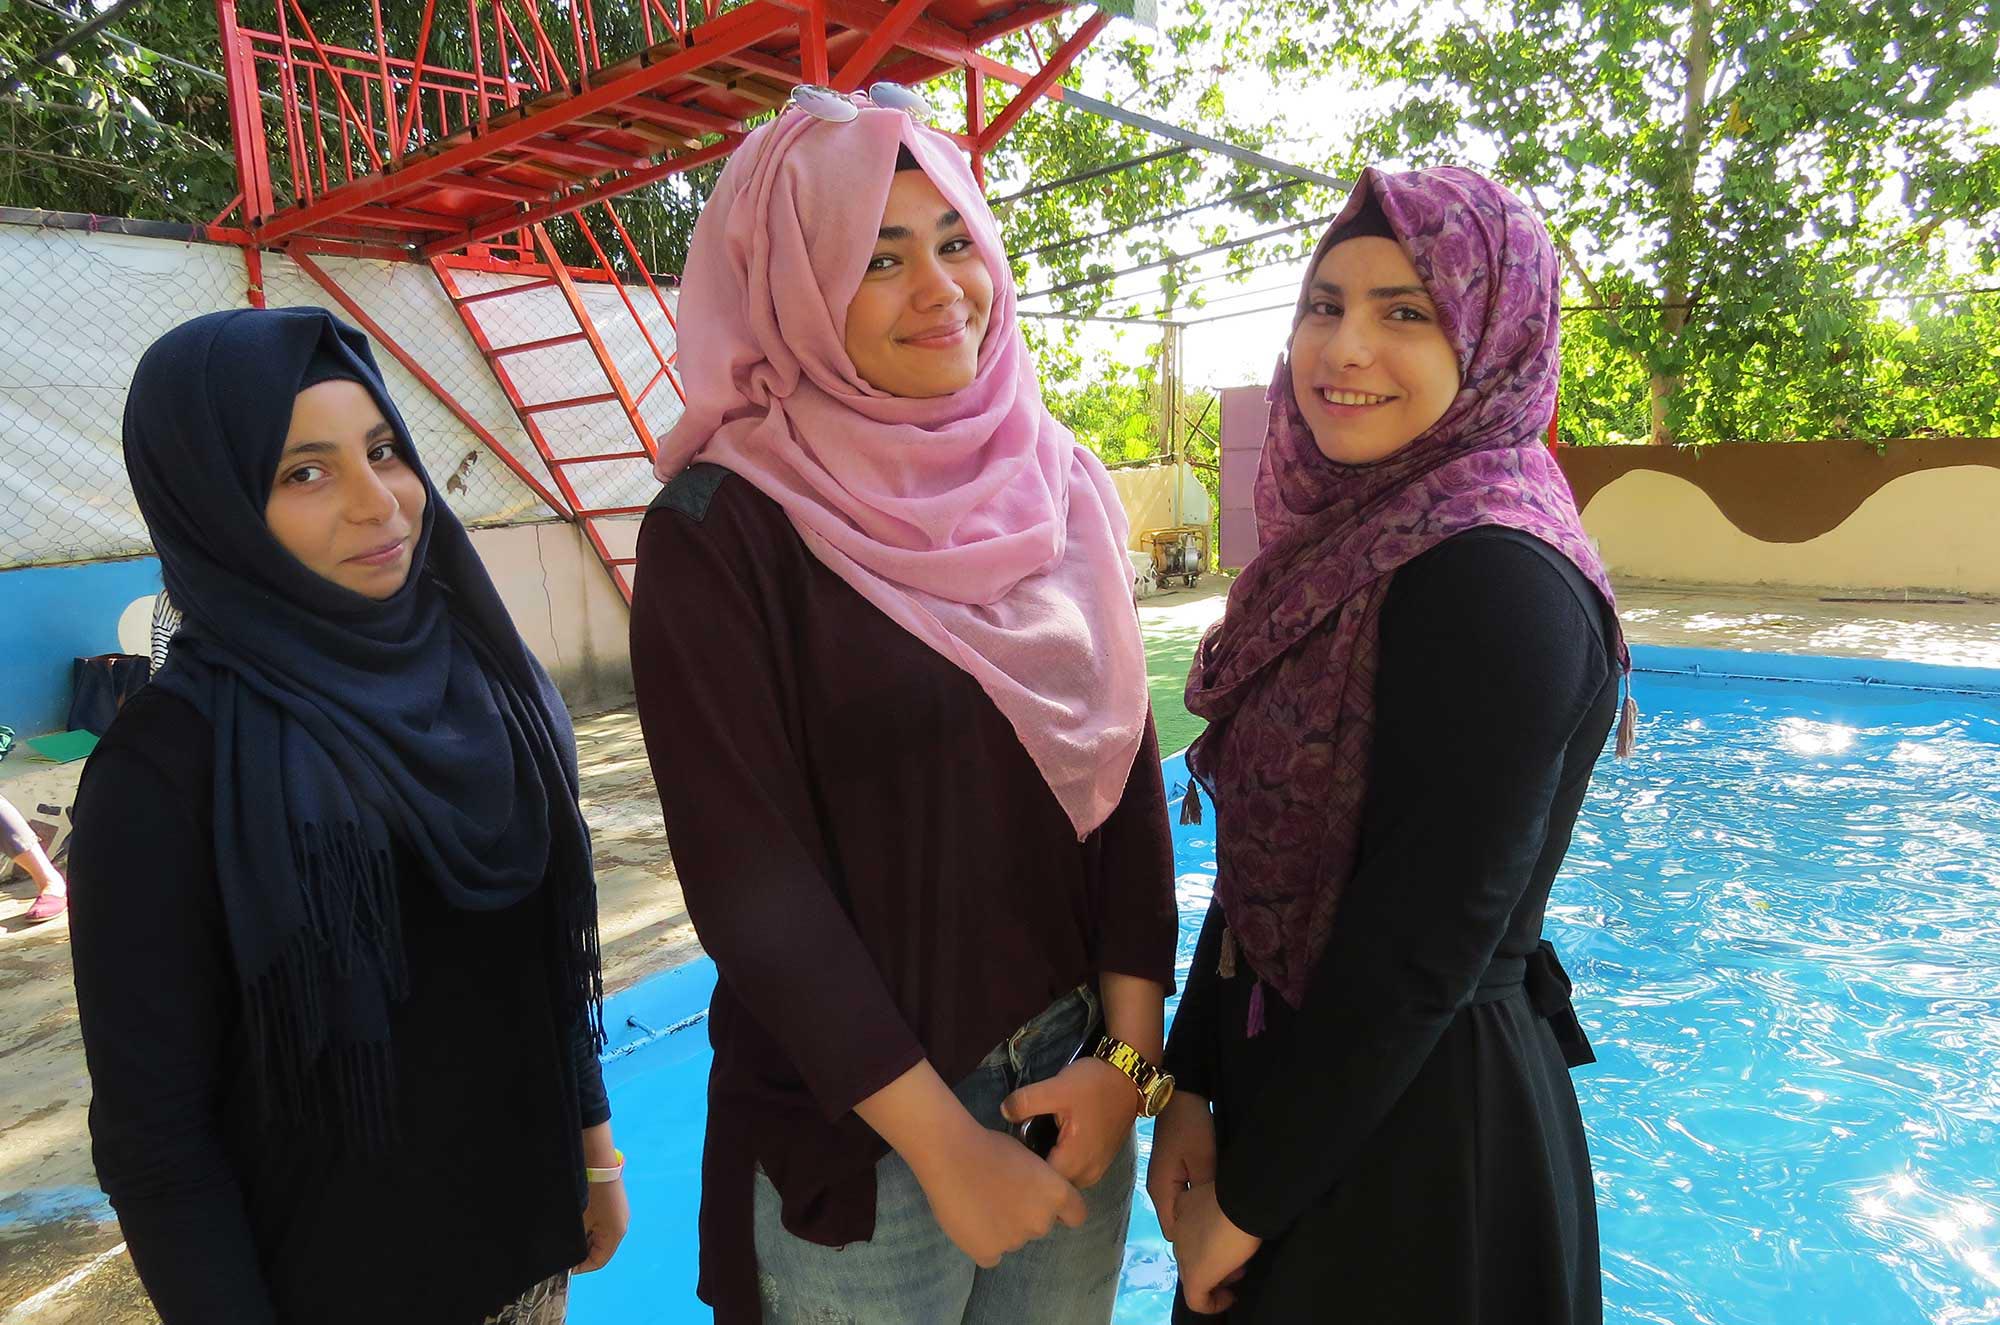 Rawan, center, is the young teacher of girls’ swim classes. Lina and Mona, beside her, are two of her students.